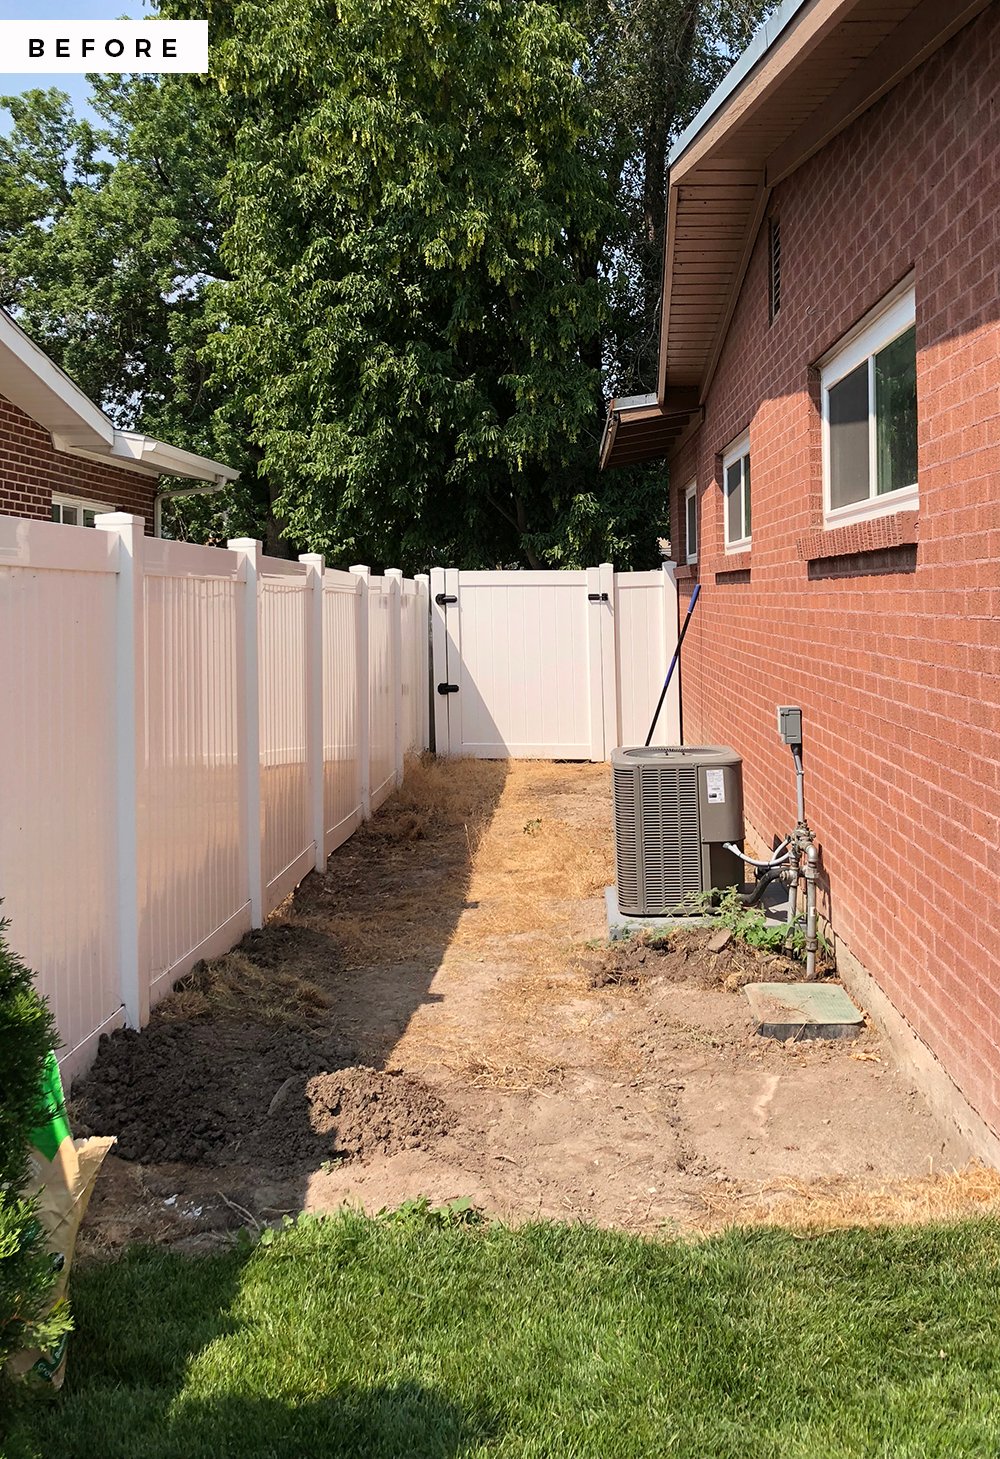 3 Day Project : Transforming Our Side Yard - roomfortuesday.com